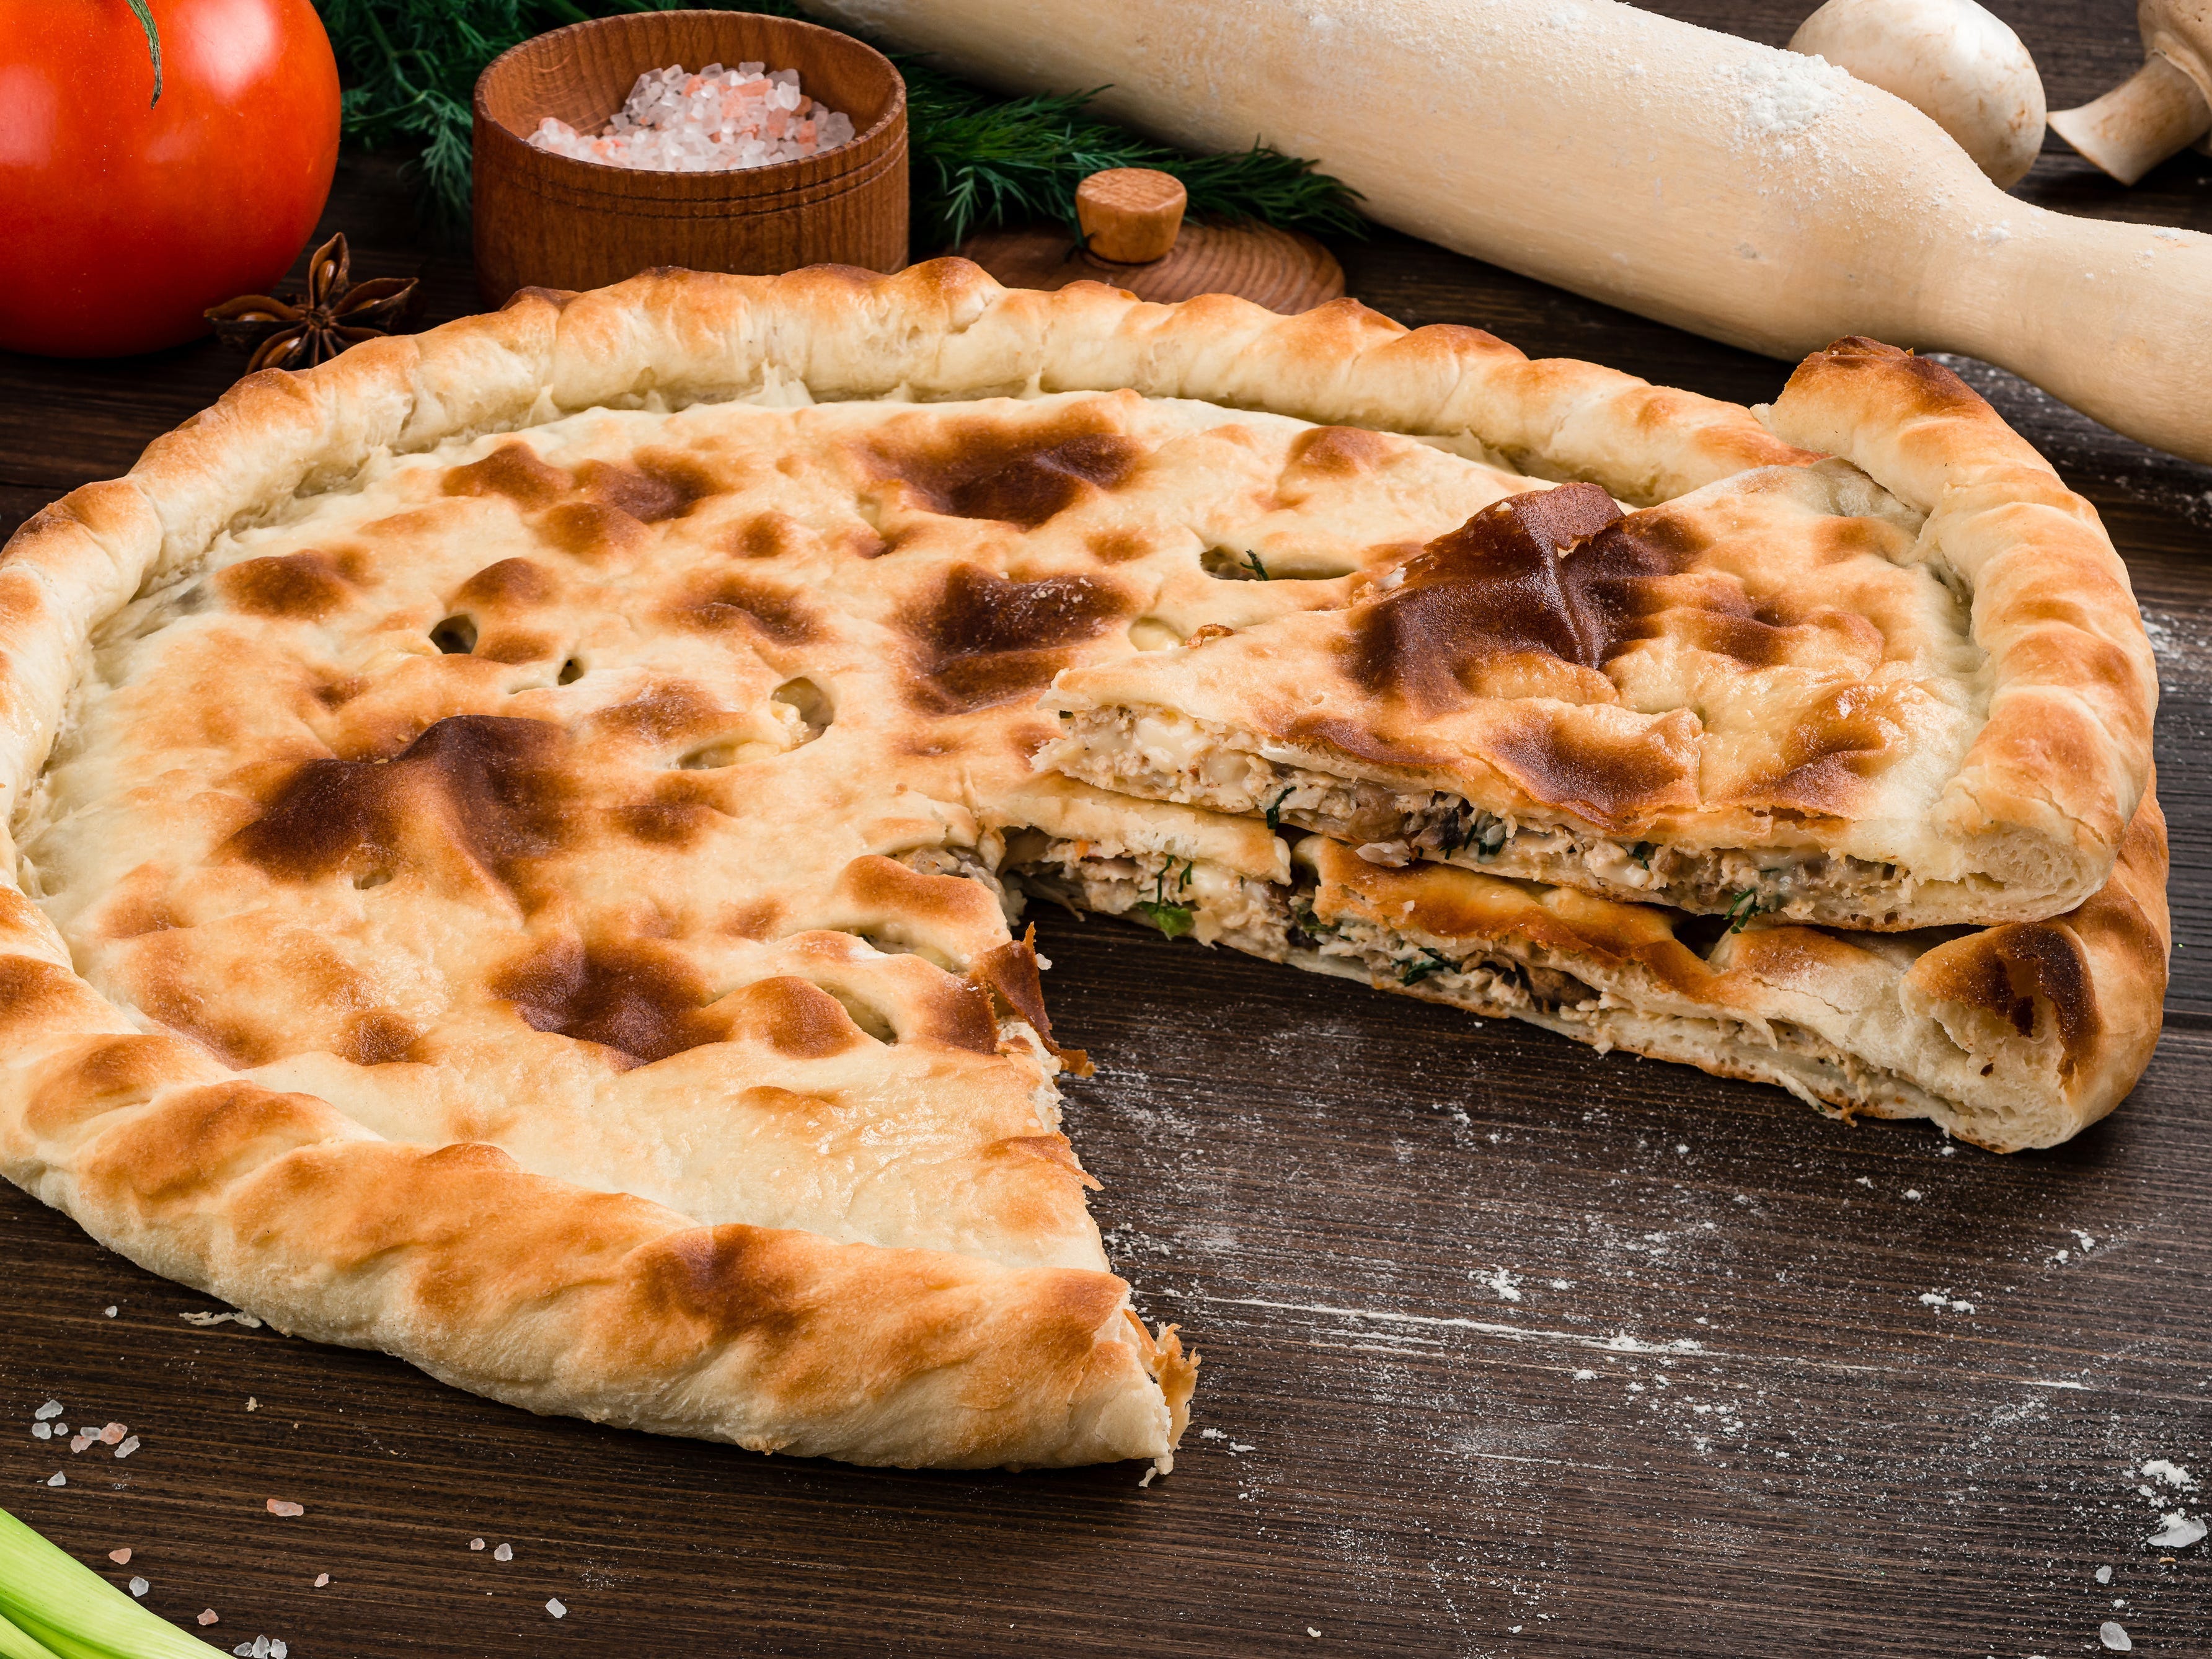 <p><a href="https://www.tasteatlas.com/ossetian-khachapuri">According to Taste Atlas</a>, Ossetian khachapuri (or Ossetian pie) originates from Georgia. </p><p>It's made with boiled potatoes and <a href="https://www.insider.com/trying-cheap-and-expensive-grilled-cheeses-review-photos-2021-7">creamy cheese</a> folded into the dough.</p>